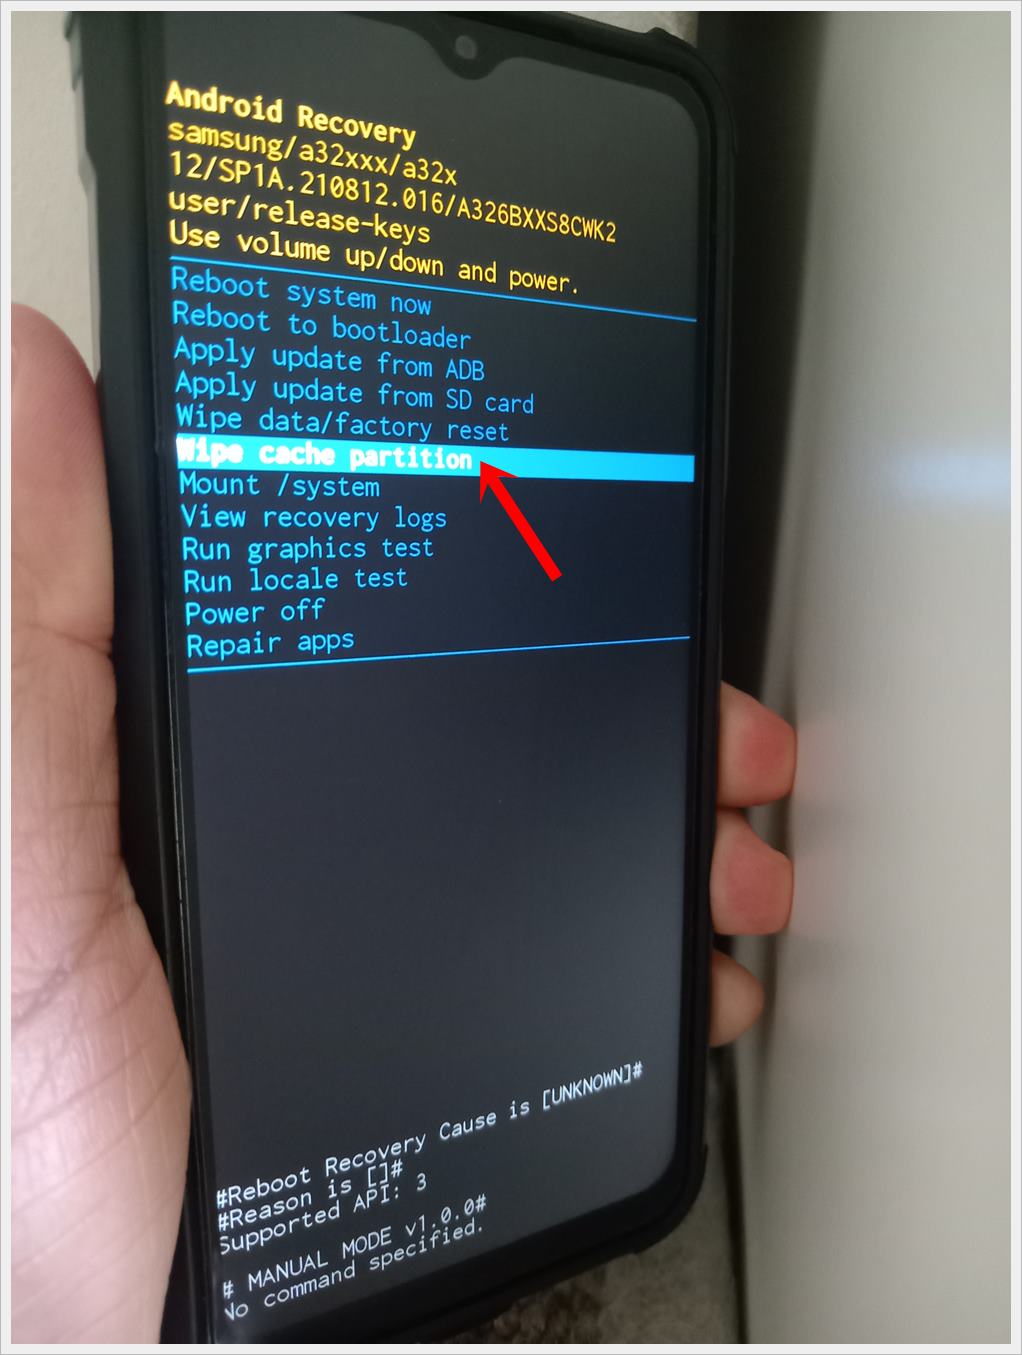 This photo shows an Android phone displaying the 'Android Recovery' screen, with the 'Wipe Cache Partition' option highlighted.